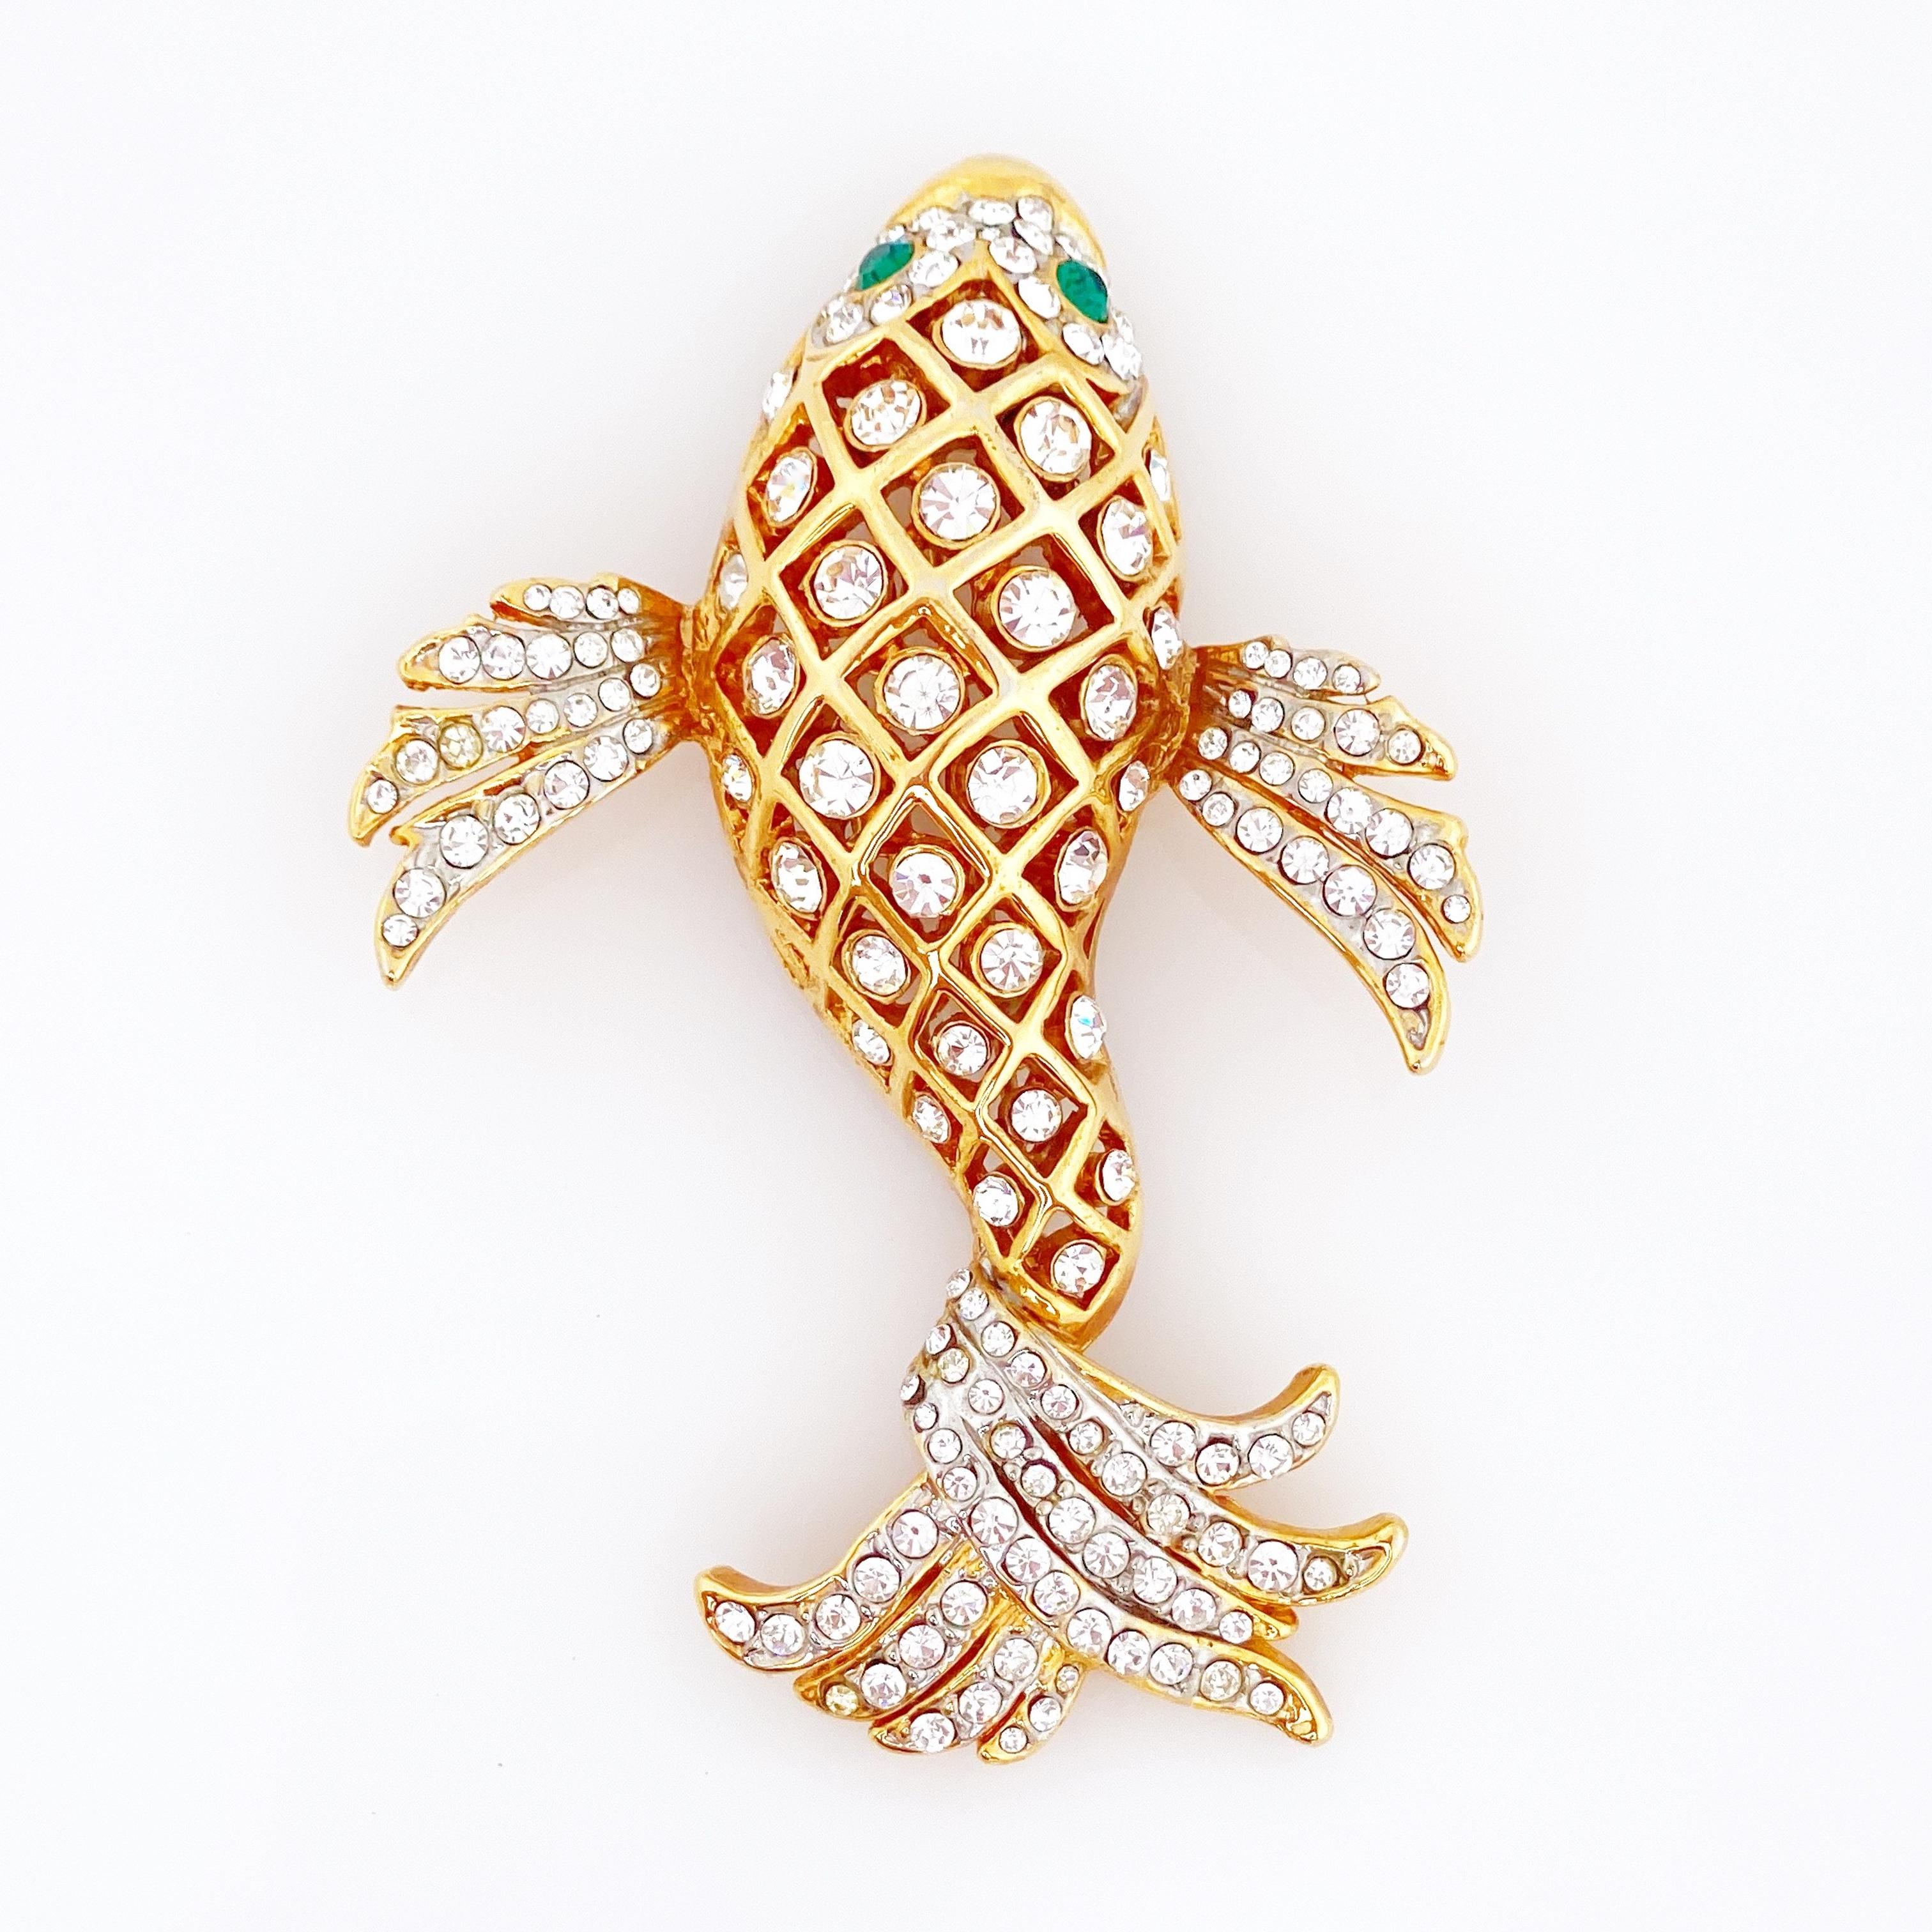 Women's Large Crystal Encrusted Koi Fish Figural Brooch, 1980s